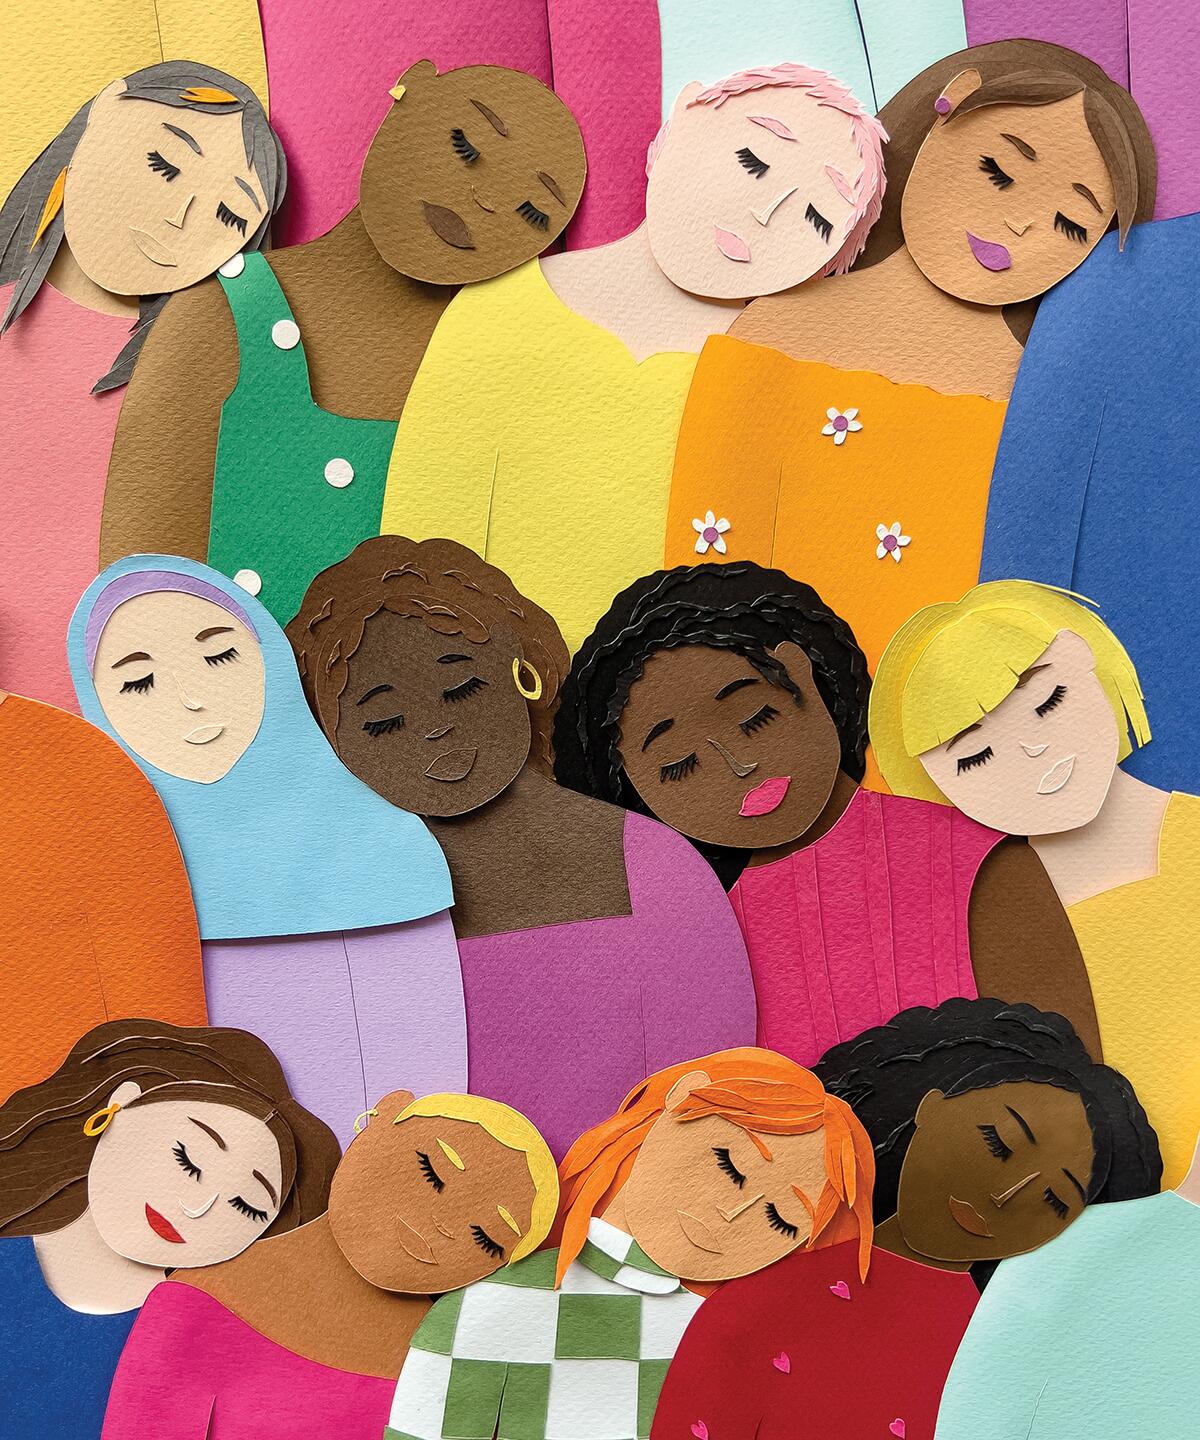 Illustration of diverse women leaning on each other for support